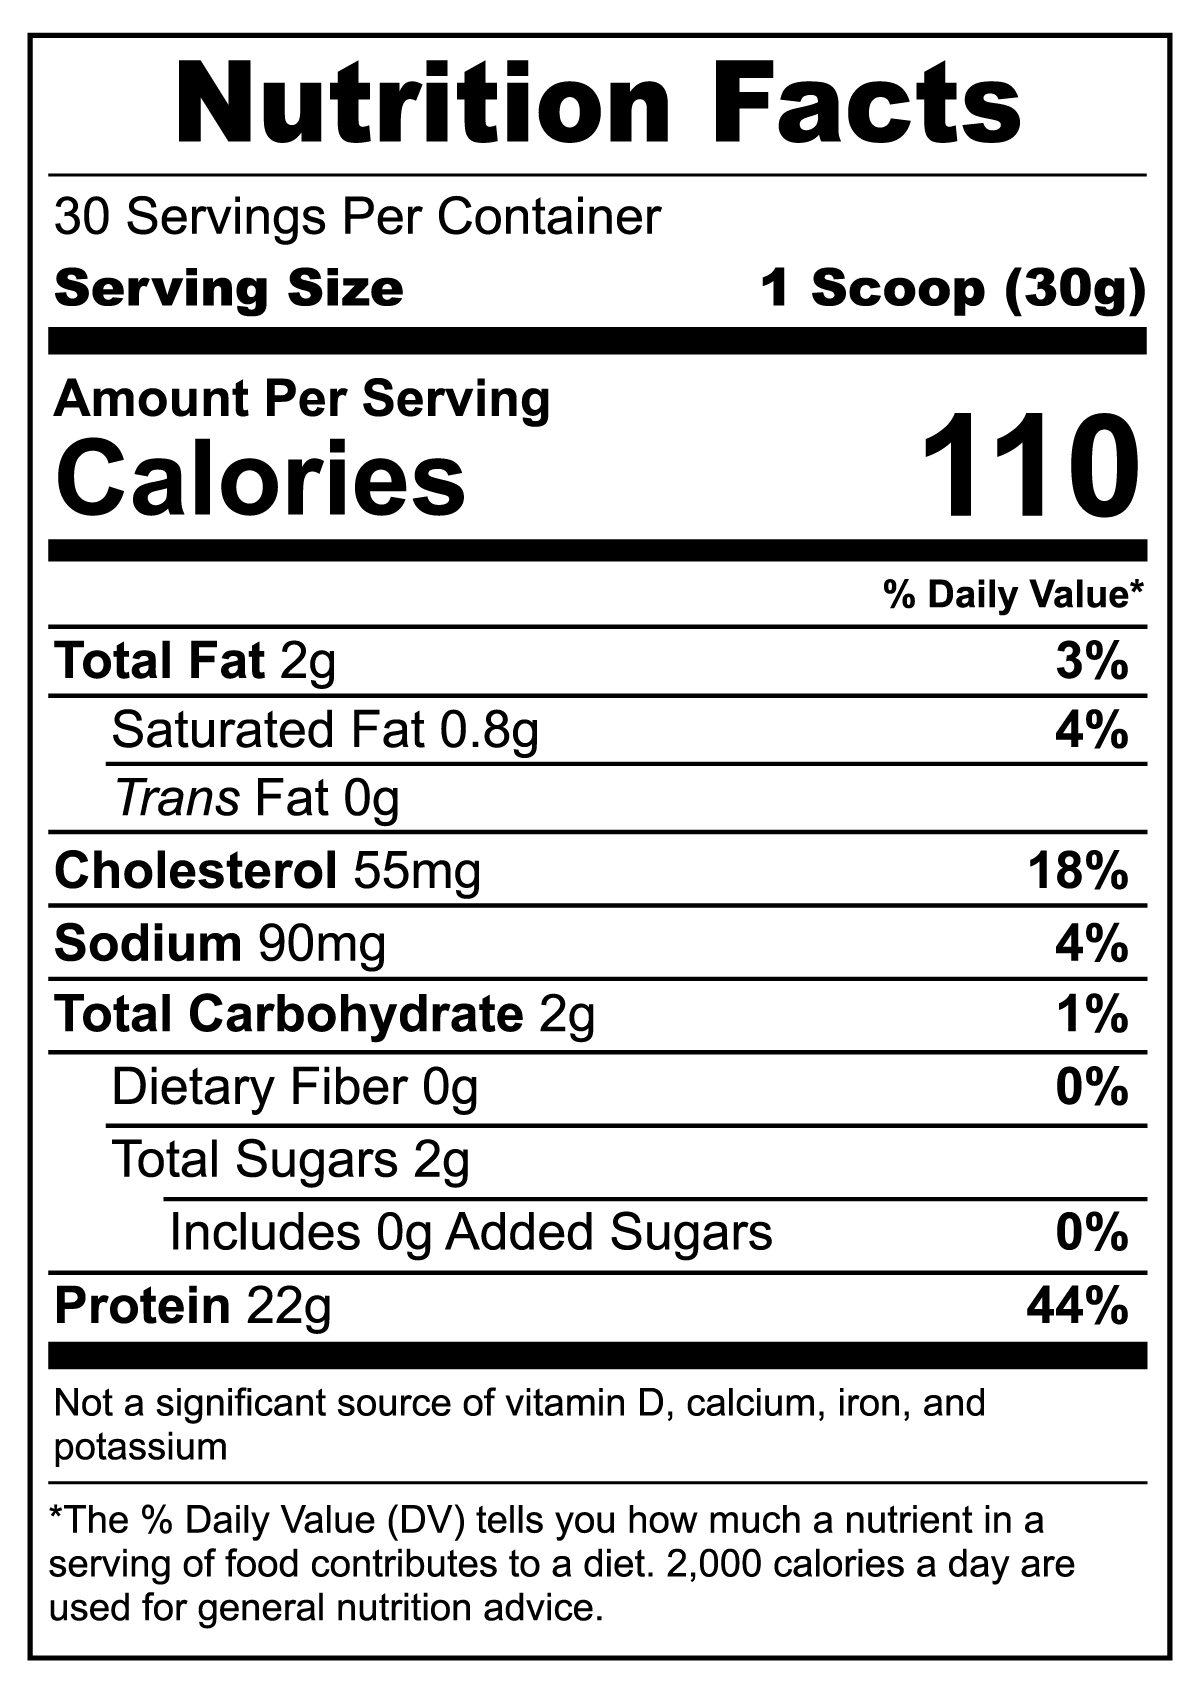 Nutrition Facts, Whey Protein By NutriGlow